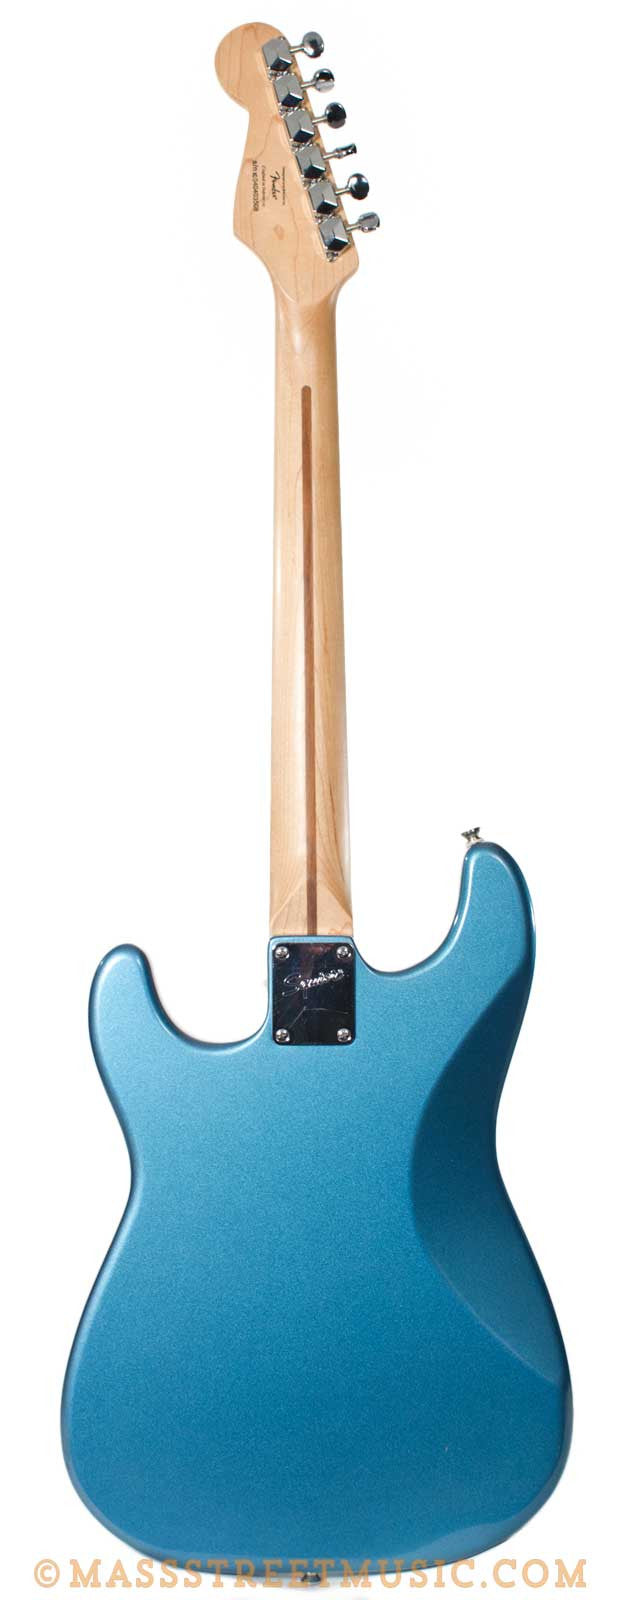 Squier Bullet Special Electric Guitar - Used - Teal Blue | Mass Street ...